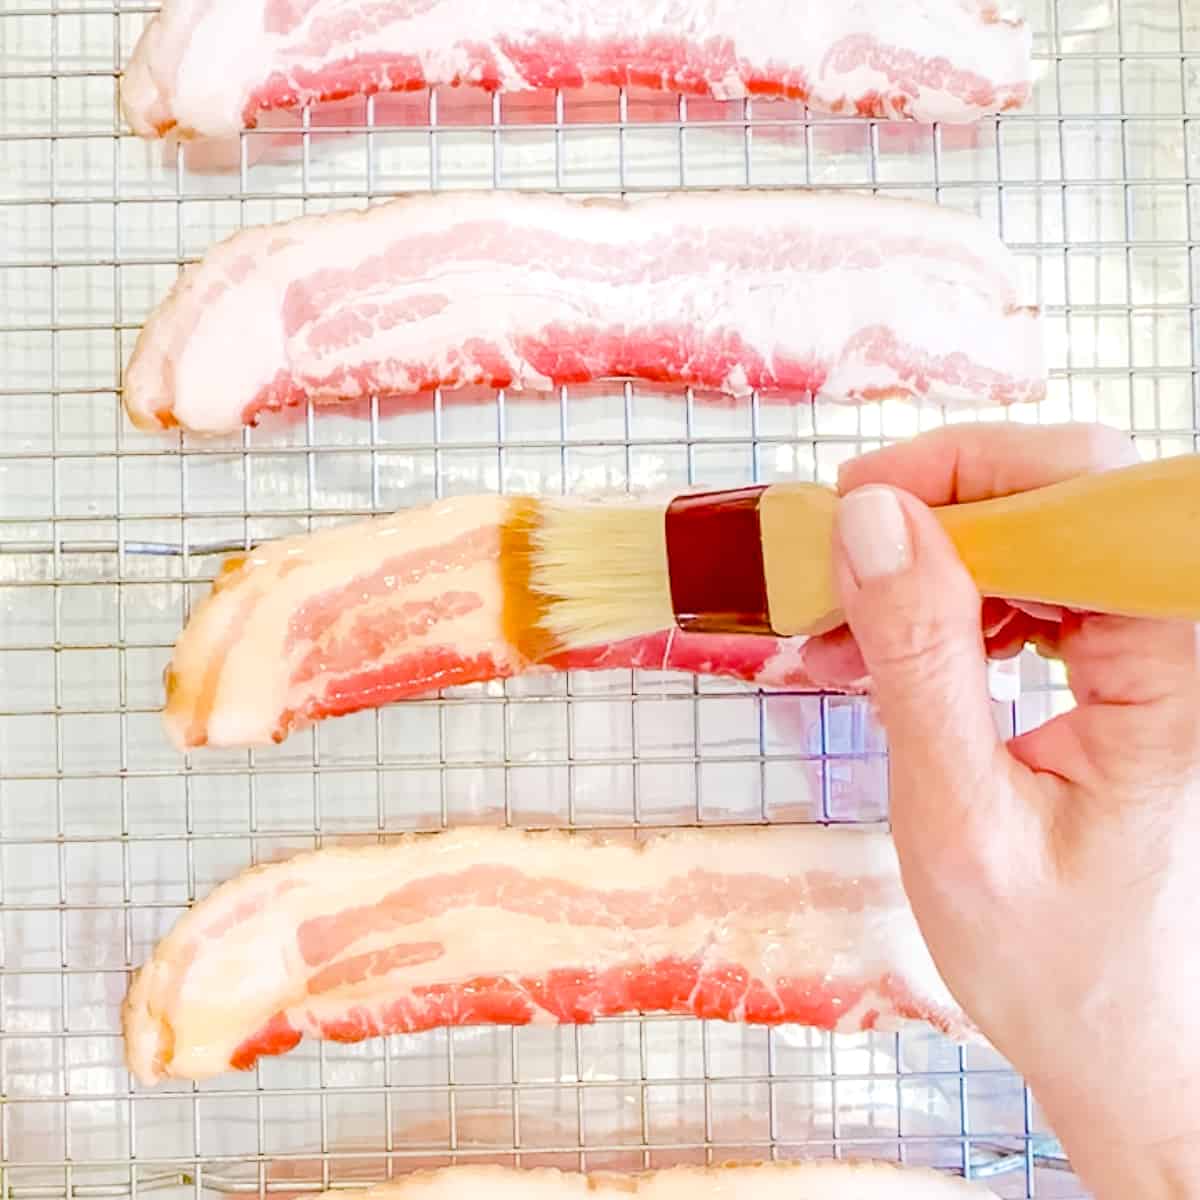 Brushing raw bacon with maple syrup.